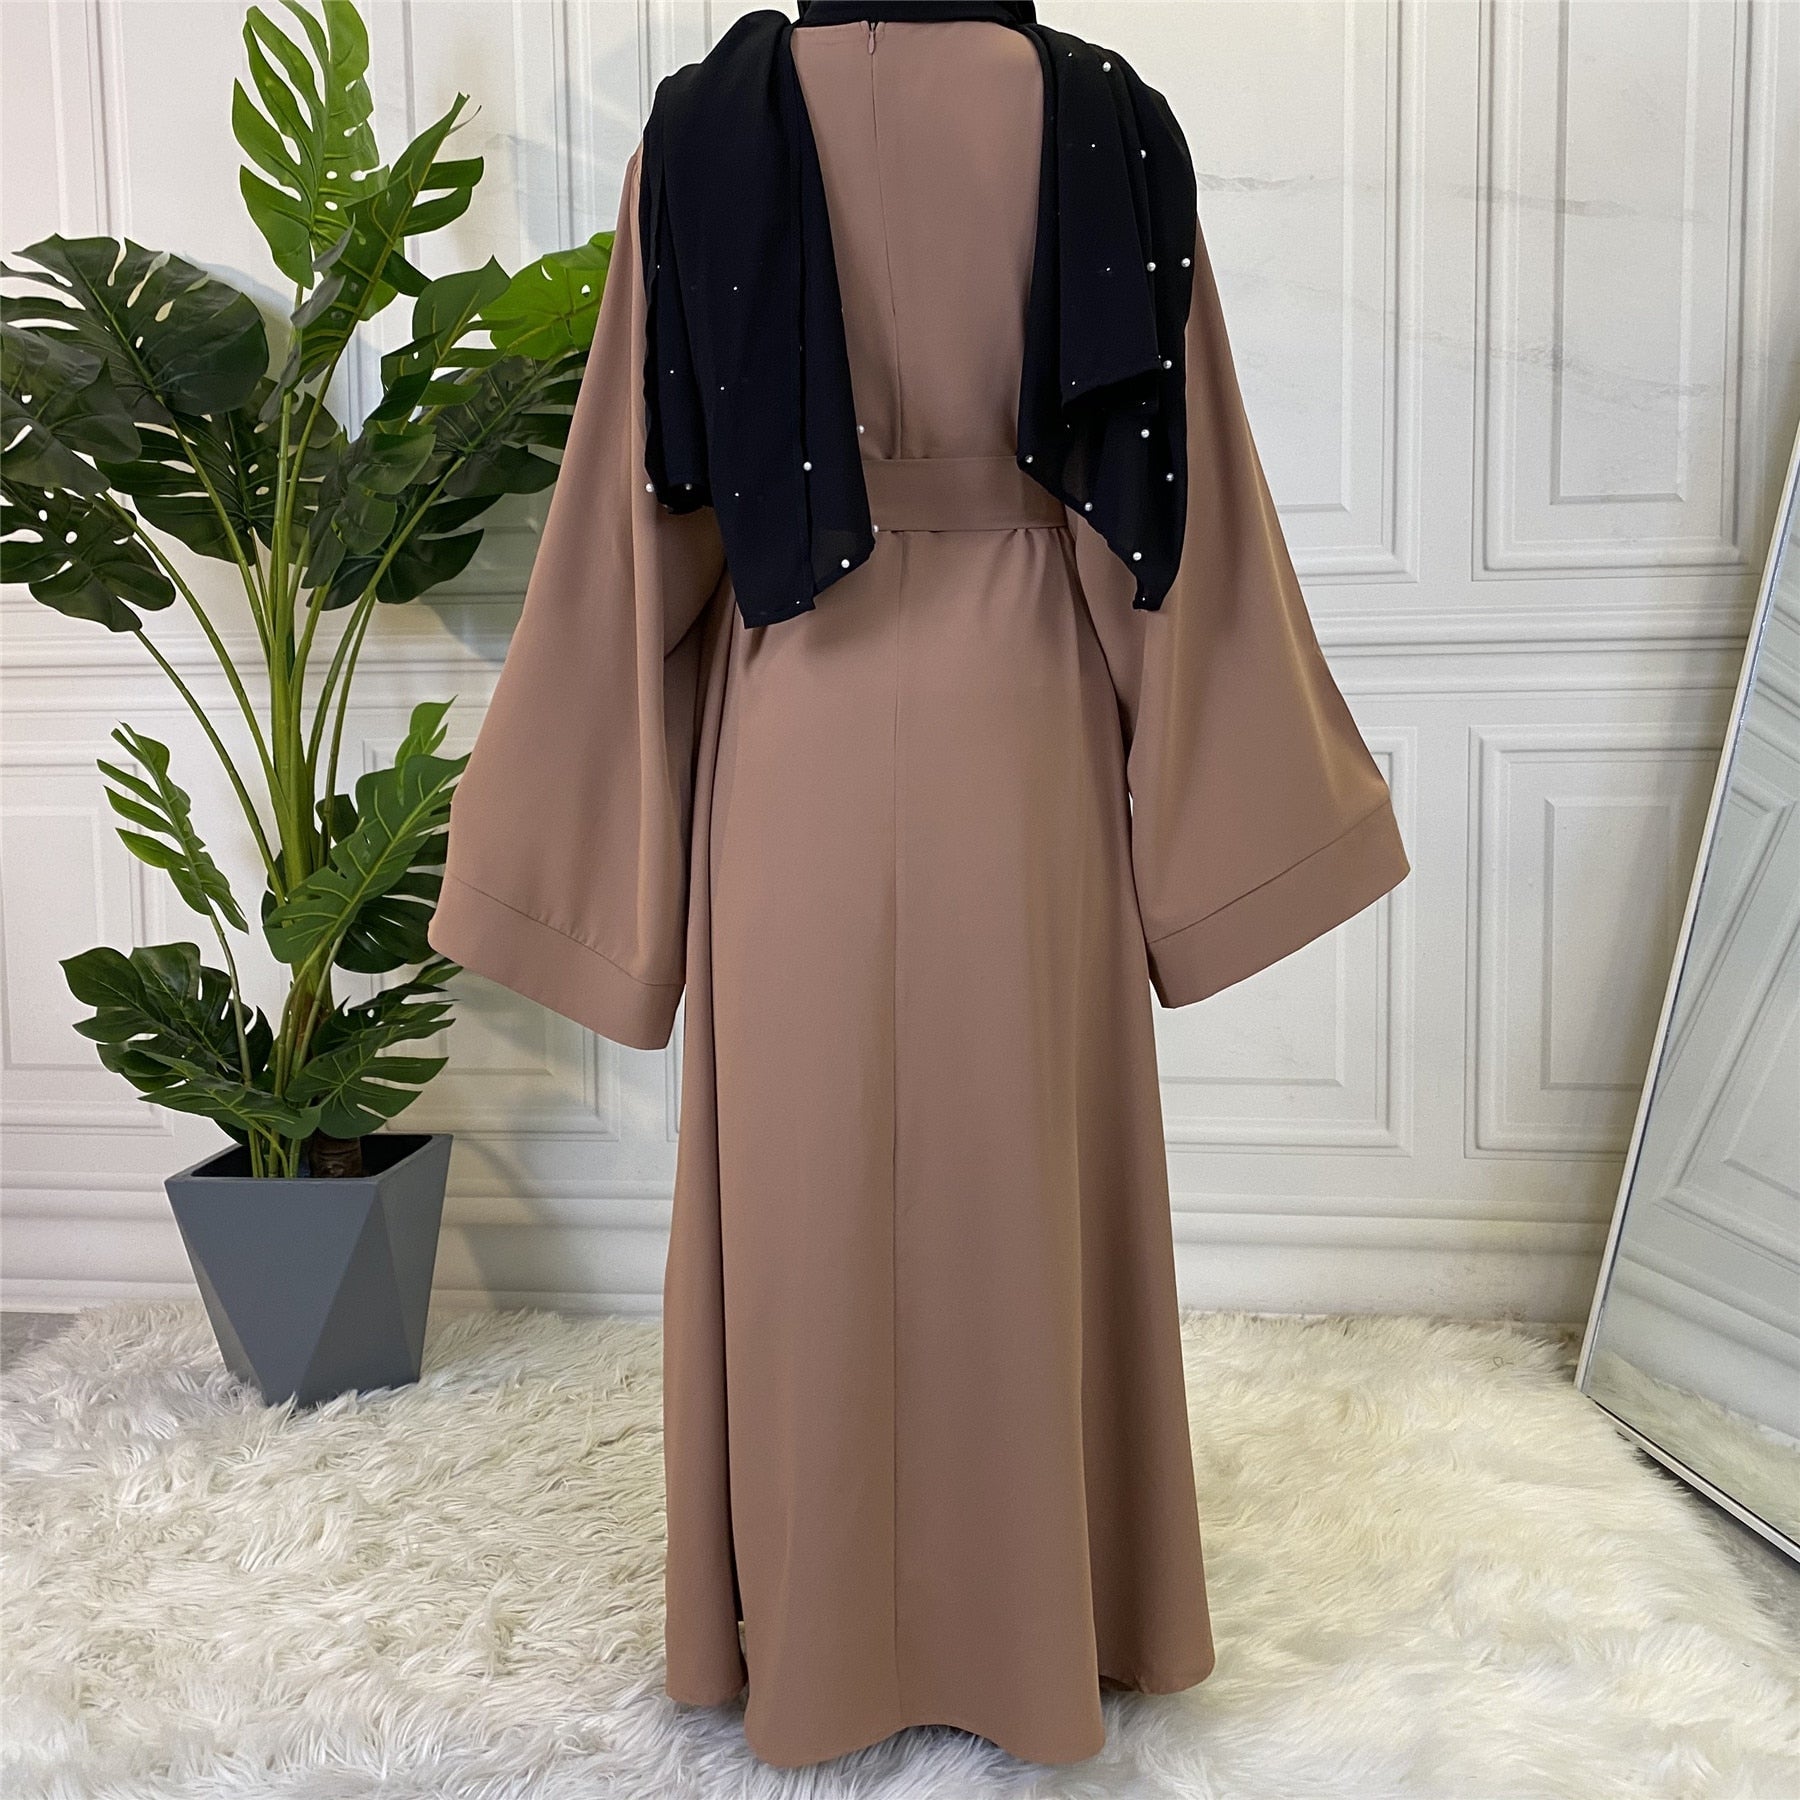 Chic and Modest: Muslim Fashion Hijab Dubai Abaya Long Dresses with Sashes for Women - Flexi Africa - Free Delivery Worldwide